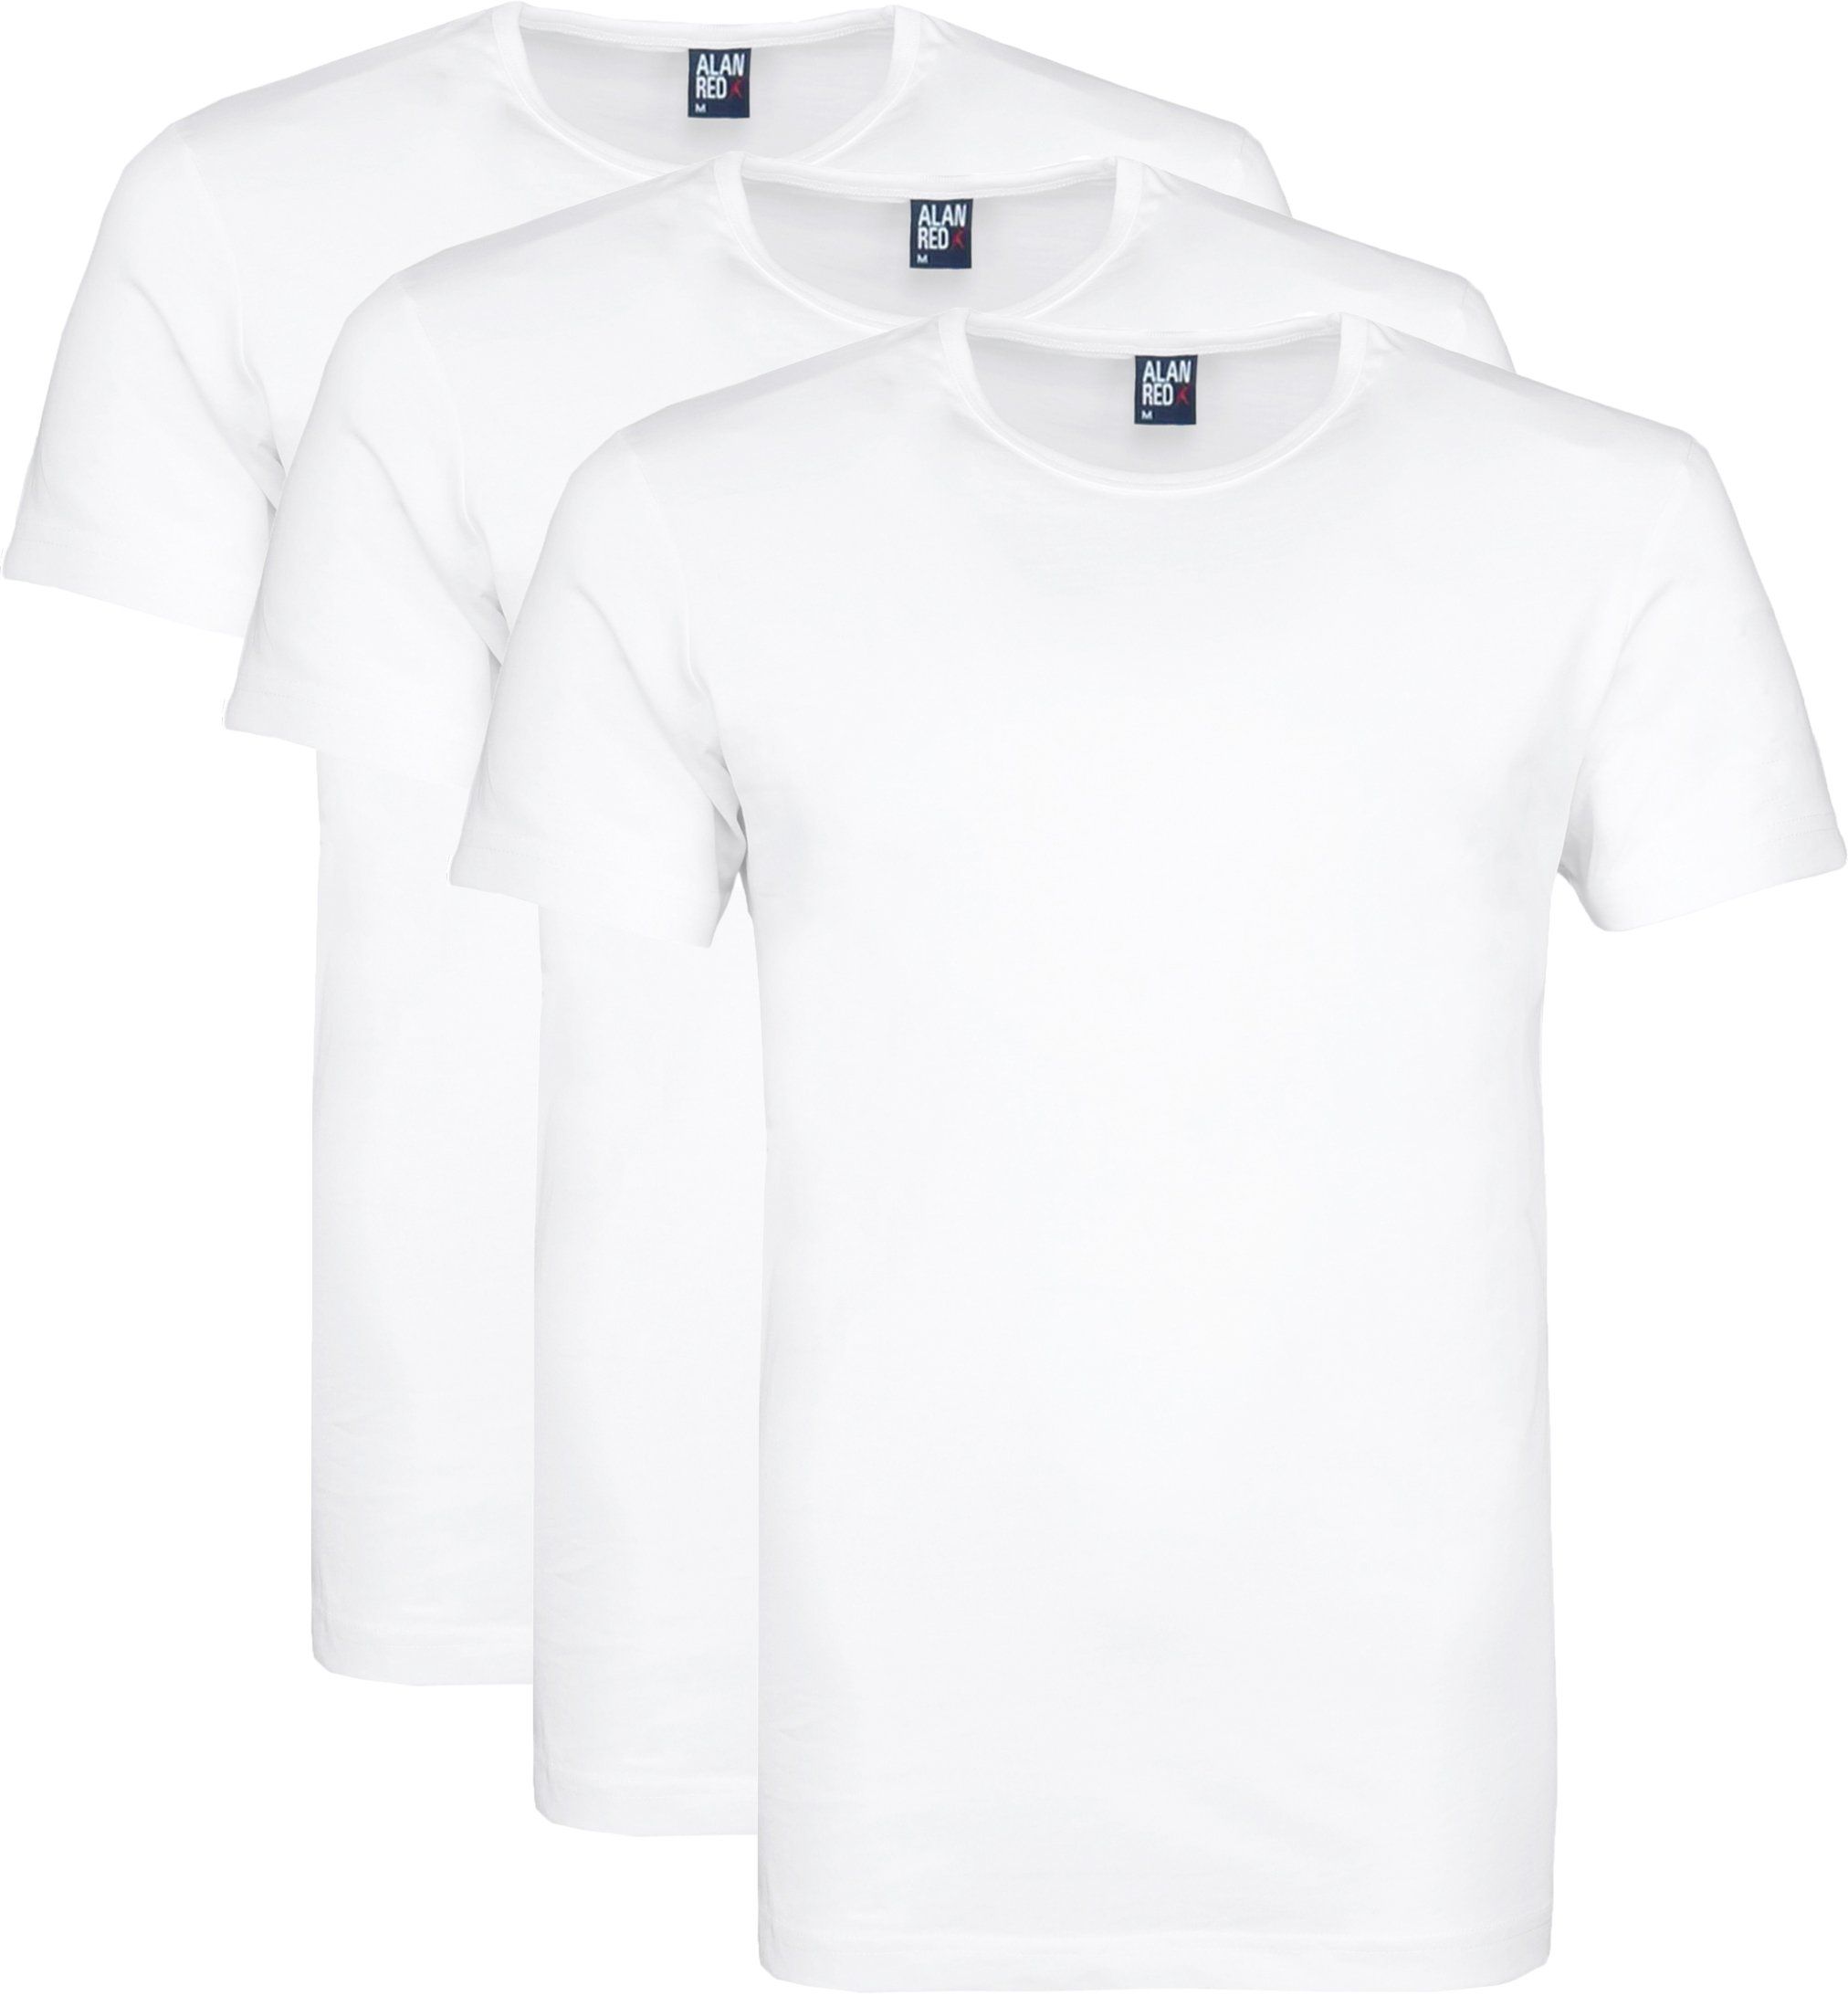 Alan Red Giftbox O-Neck T-shirts 3-Pack White size XL